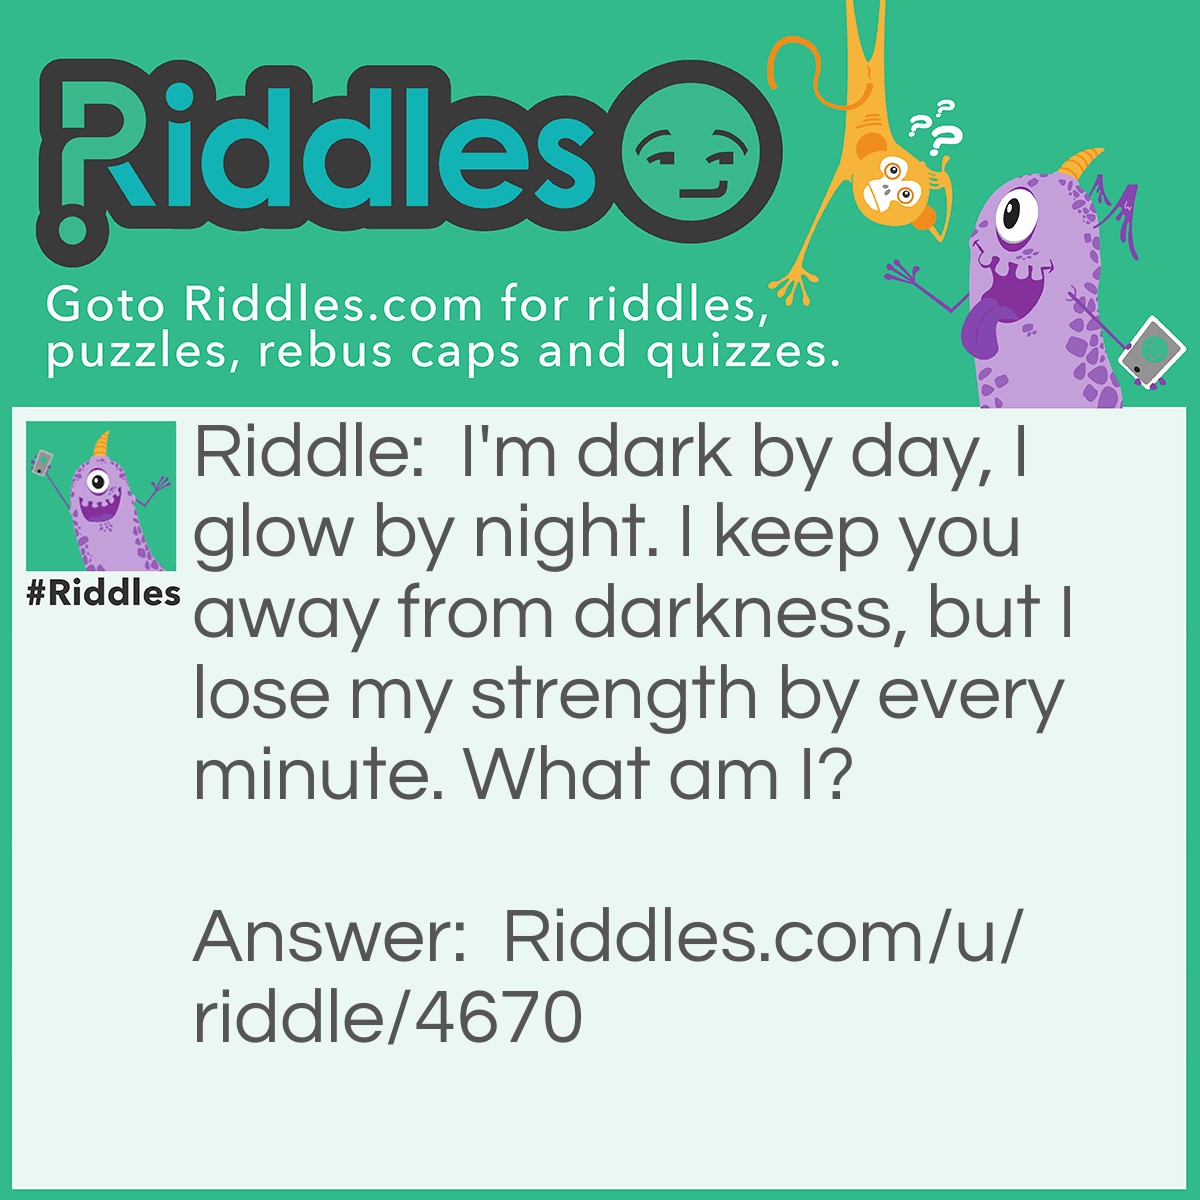 Riddle: I'm dark by day, I glow by night. I keep you away from darkness, but I lose my strength by every minute. What am I? Answer: A glow stick.